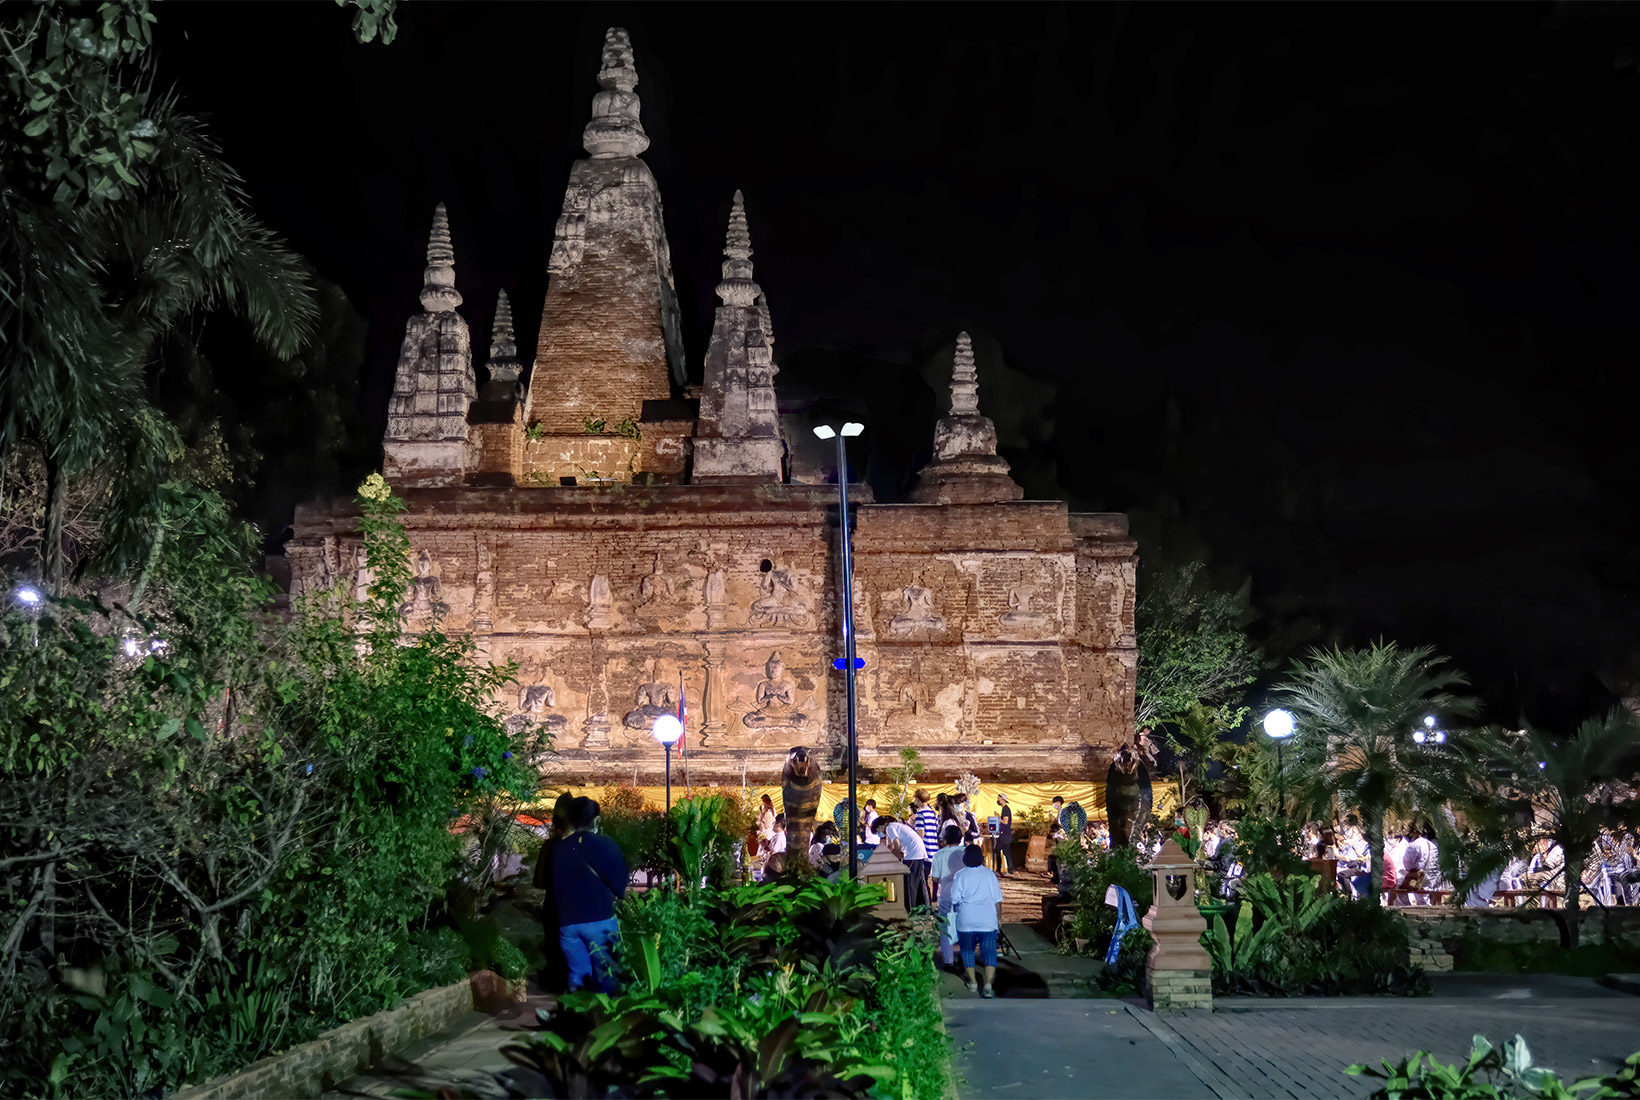 The 800-year old Viharn (worship hall) at Wat Jed Yod in Chiang Mai, Thailand. The seven spires atop its flat roof are said to have been modeled after the Mahabodhi Stupa in Bodh Gaya, India, where Buddha attained enlightenment.